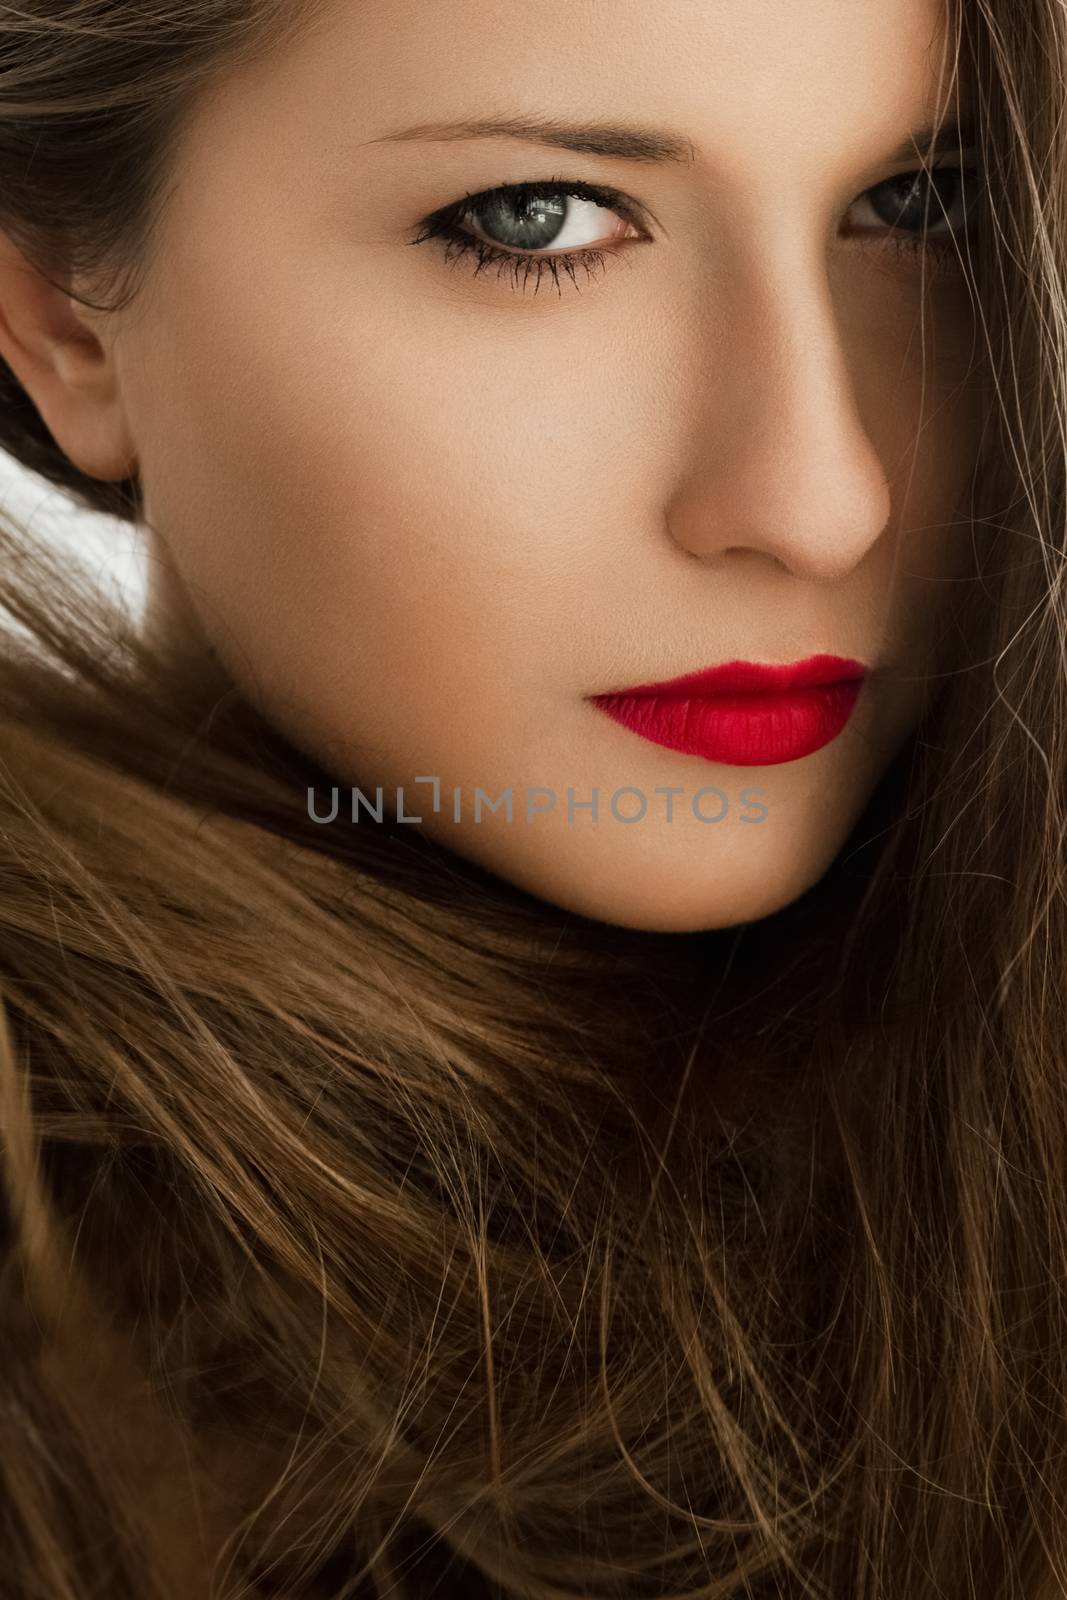 Closeup beauty portrait of a woman with classy makeup look and p by Anneleven